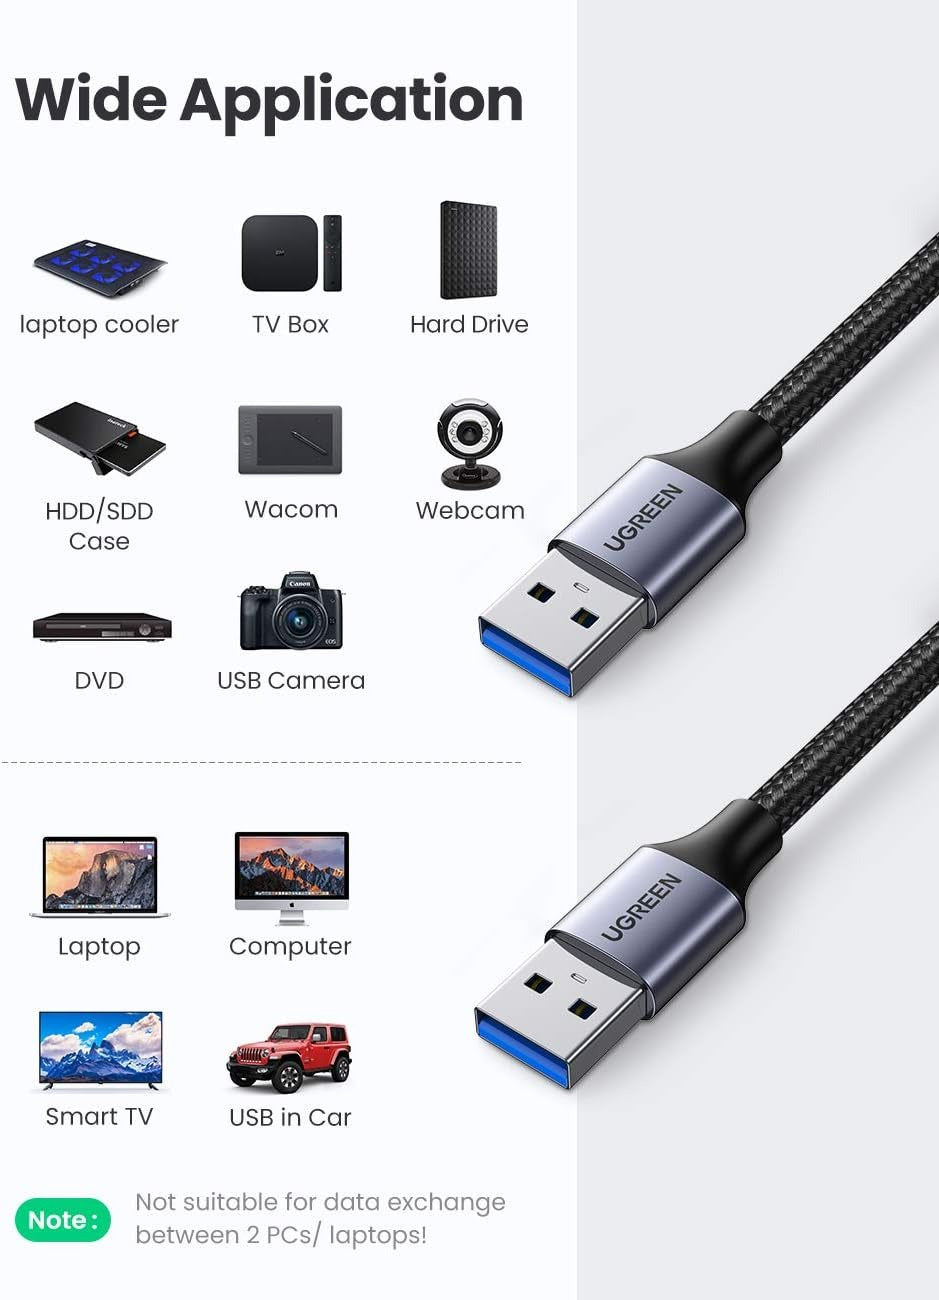 UGREEN USB 3.0 Type A Male to Male SuperSpeed Fast Transfer Data Cable for Hard Drive, DVD Player, PC, Laptop Computer, TV, and Webcam (0.5M / 1M / 2M)